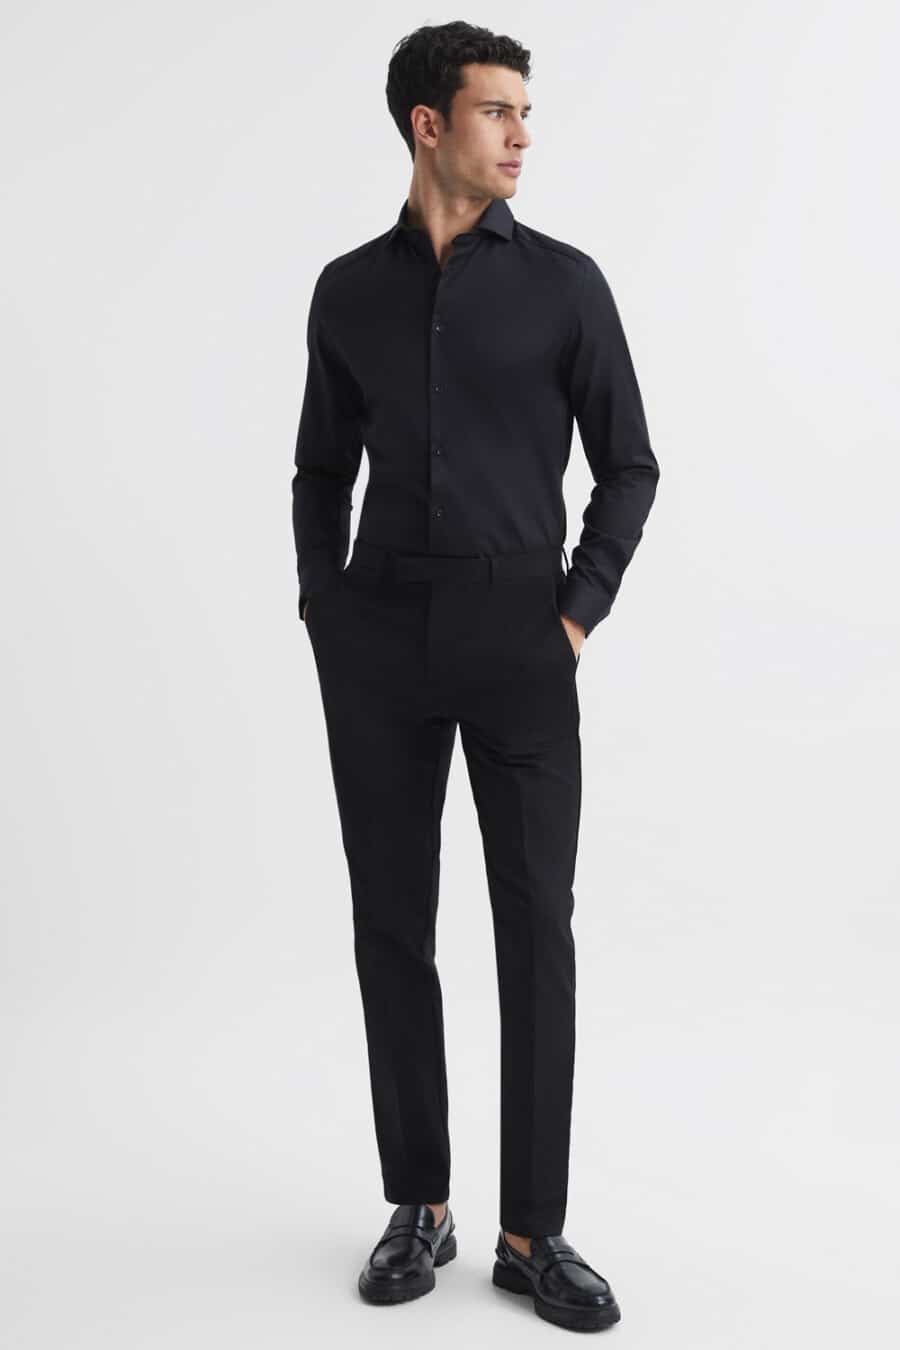 Men's black pants, black dress shirt and black leather penny loafers outfit